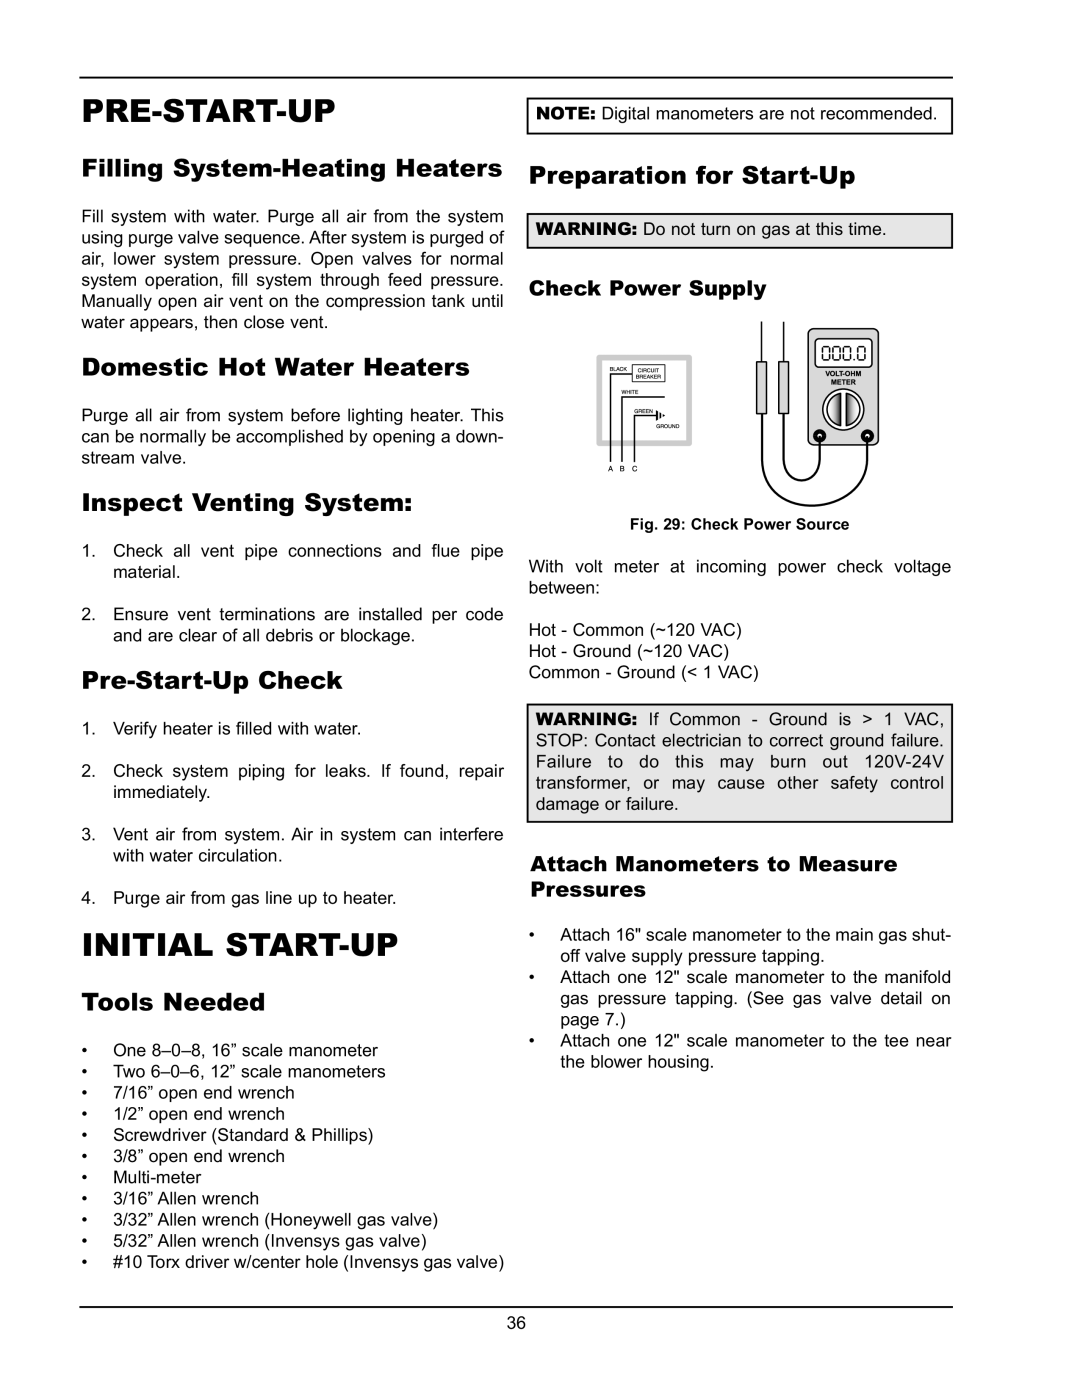 Raypak HD401 Initial Start-Up, Domestic Hot Water Heaters, Inspect Venting System, Pre-Start-UpCheck, Tools Needed 